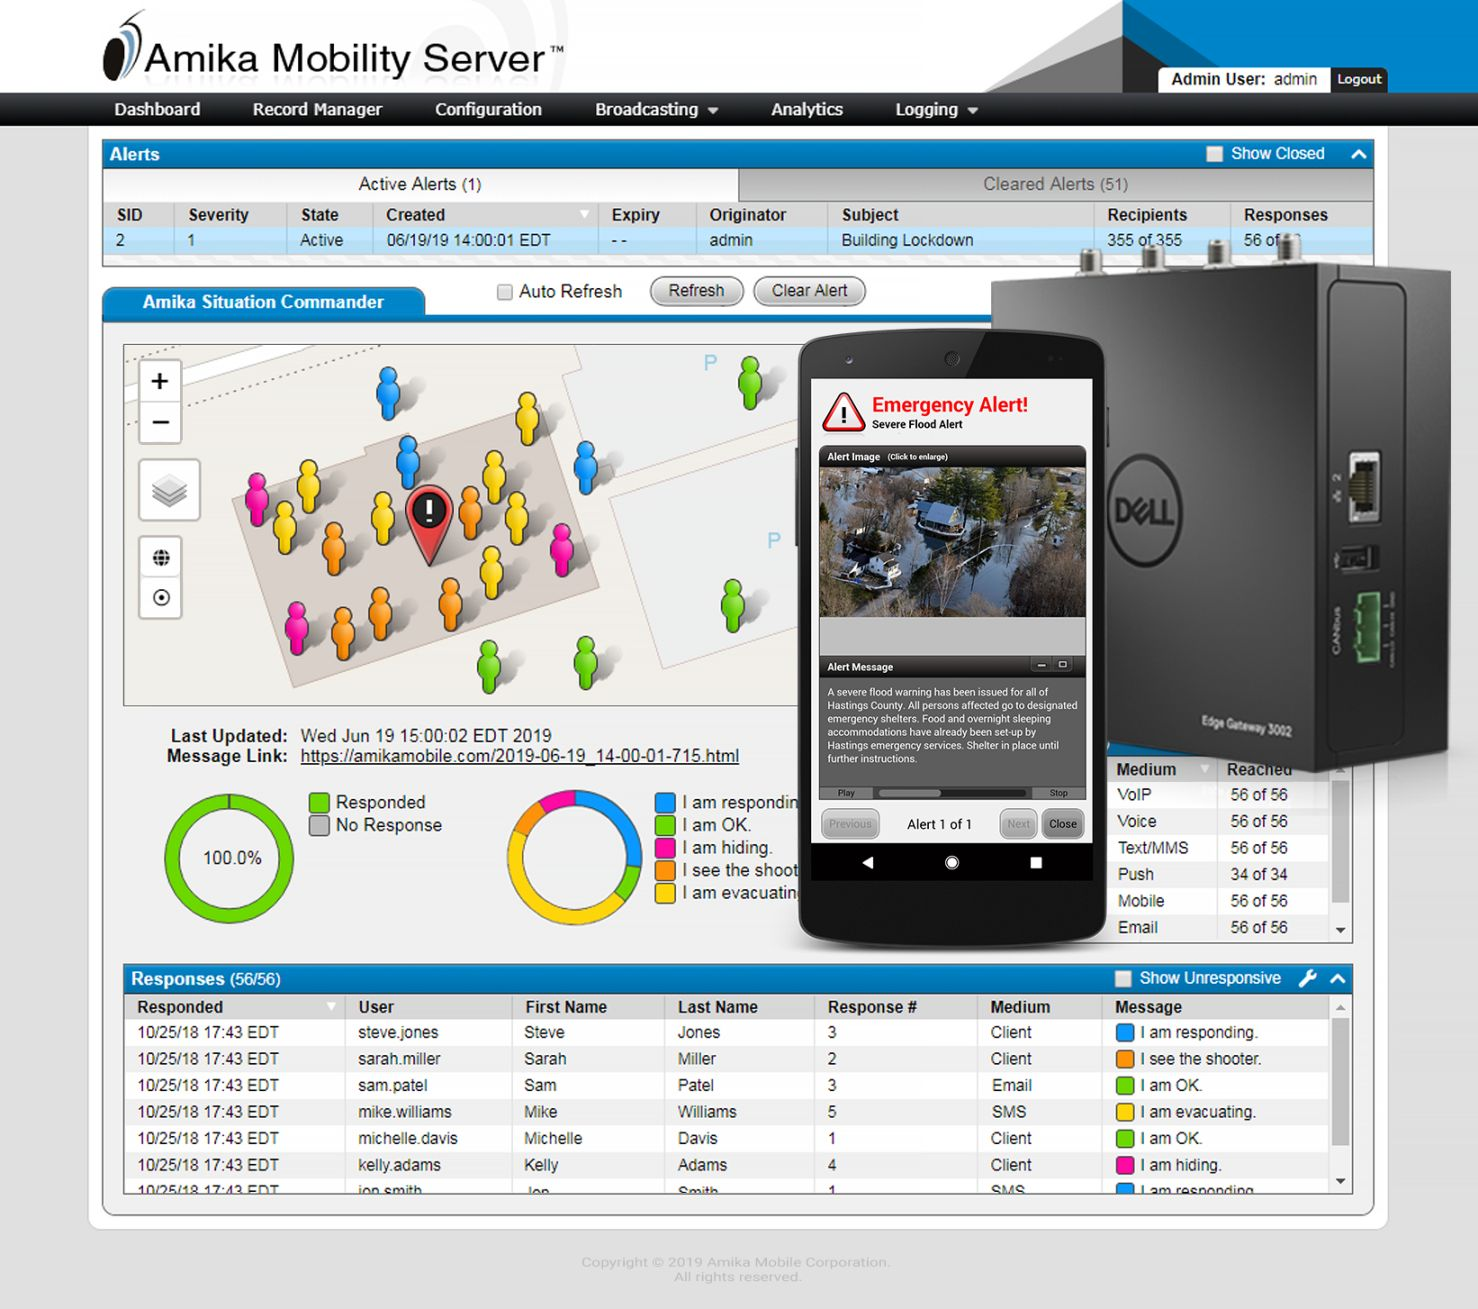 Amika Mobile, Tuesday, March 10, 2020, Press release picture